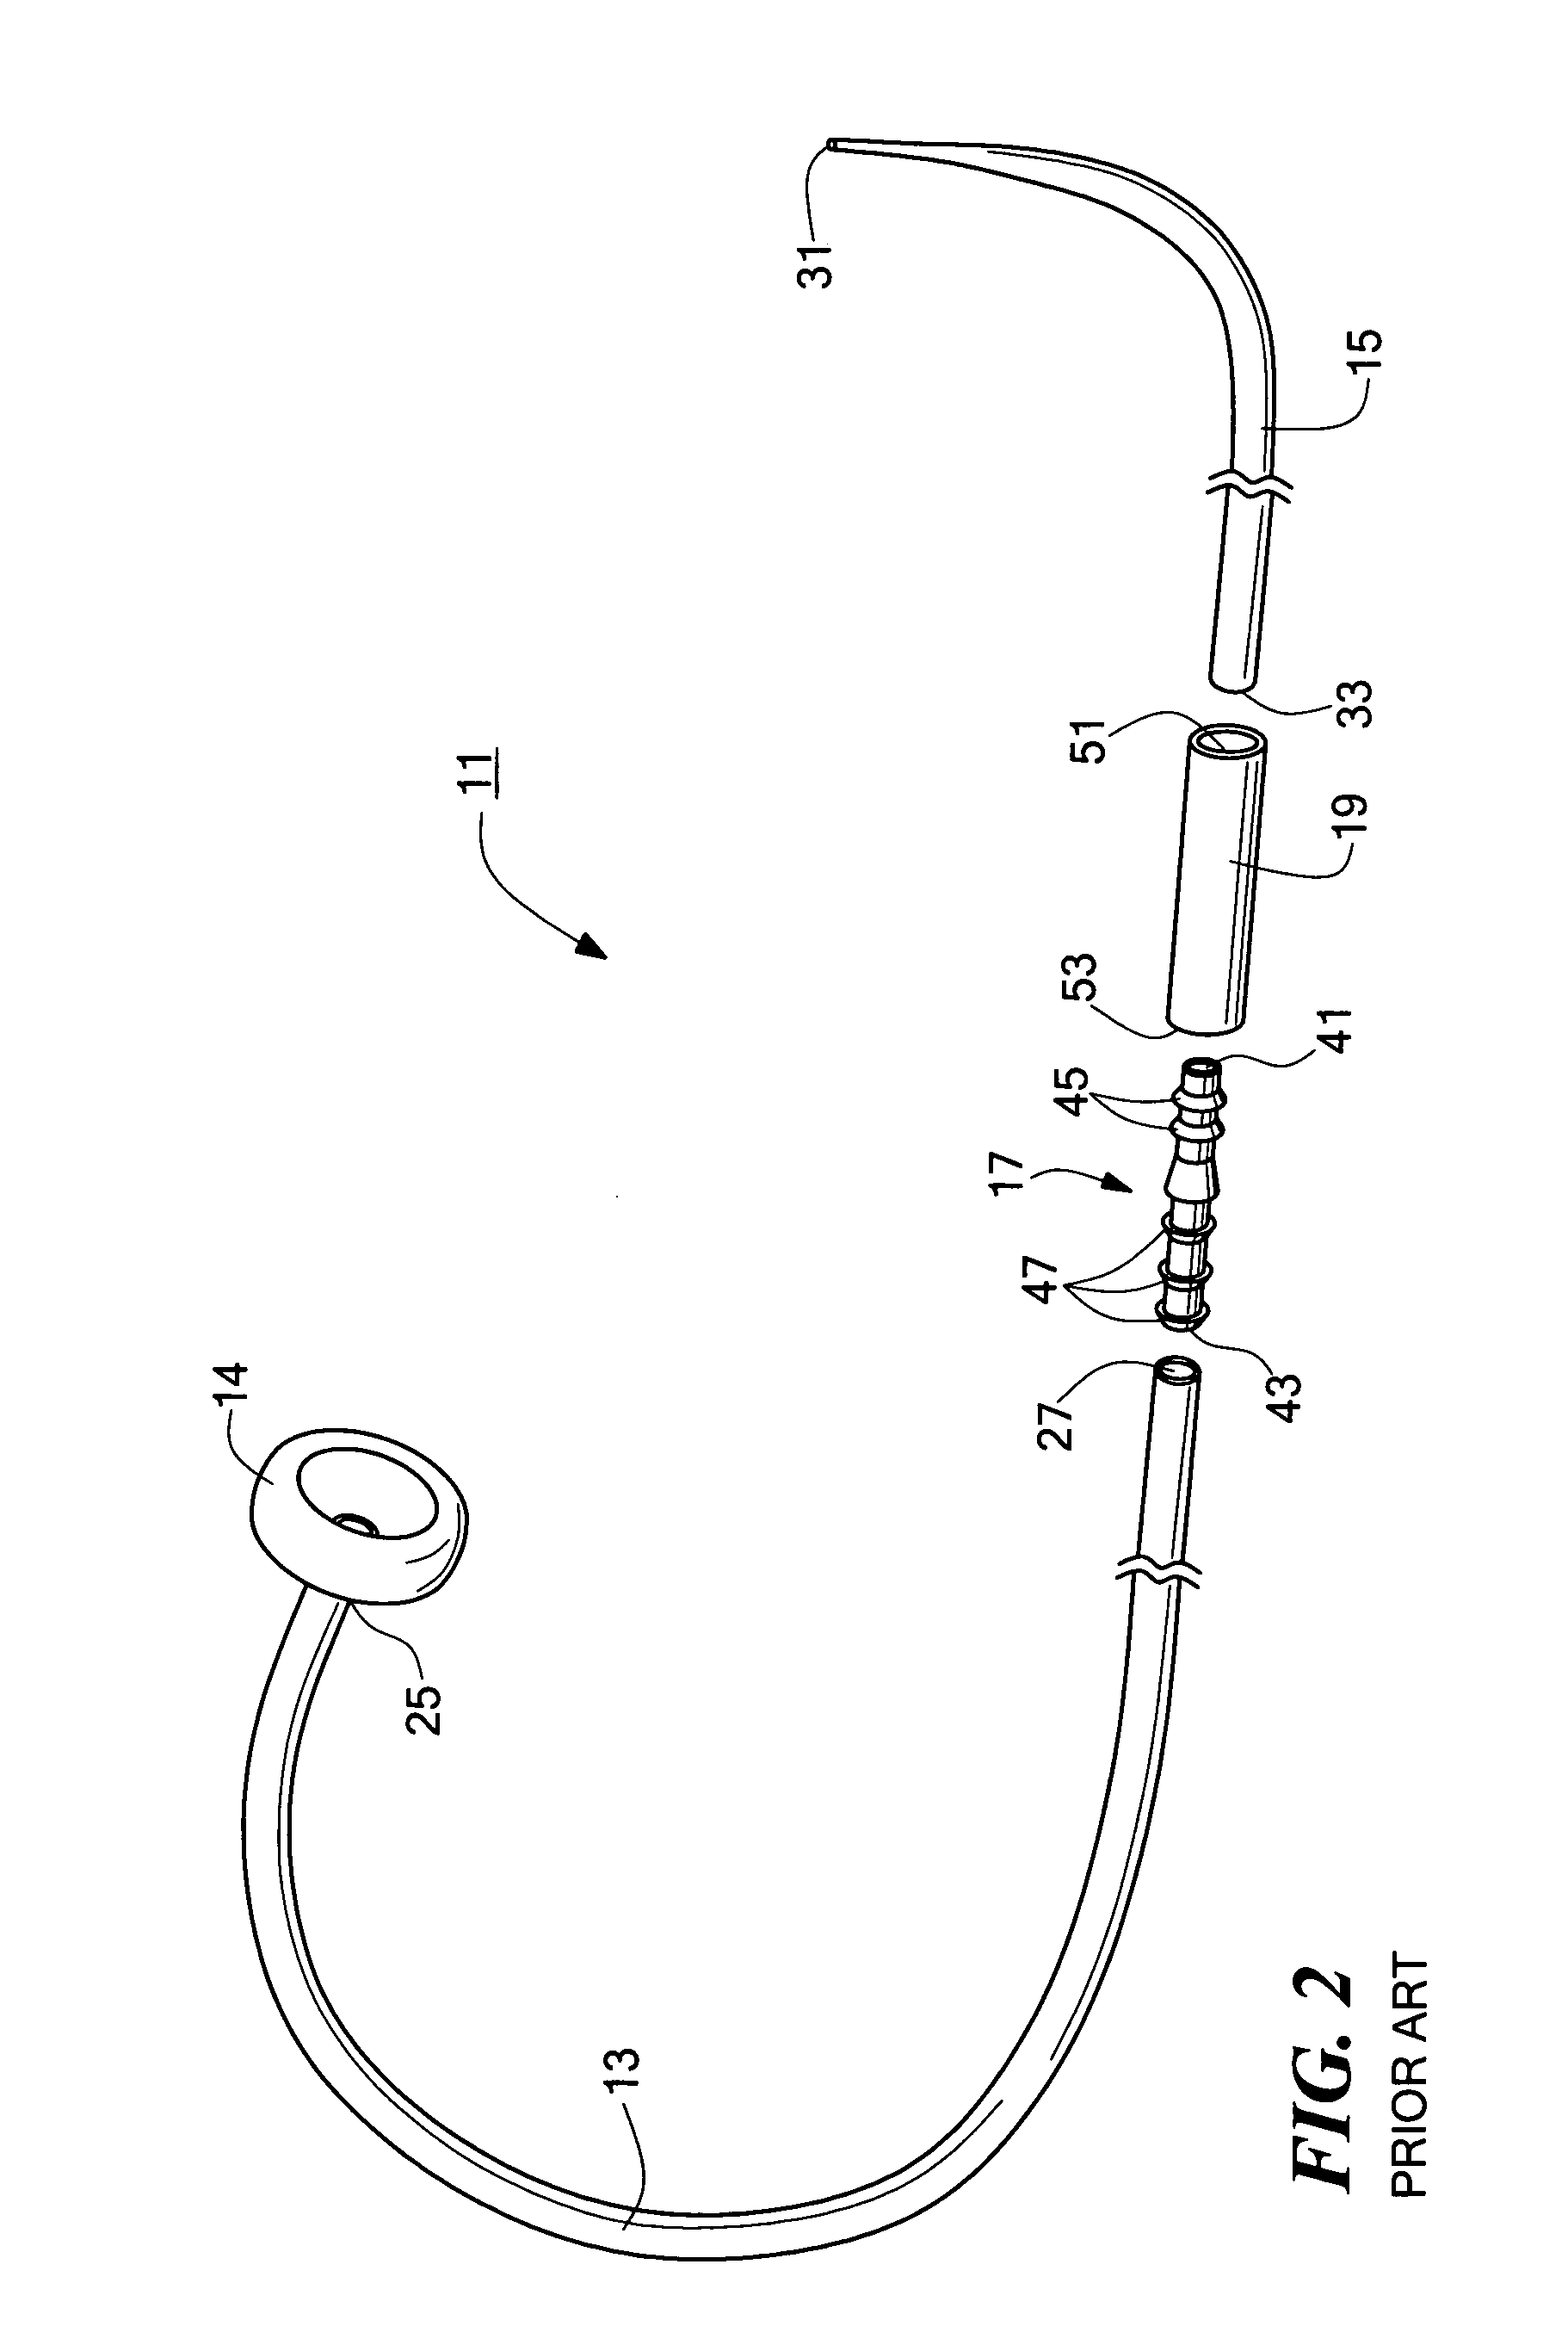 Connector for use with a medical catheter and medical catheter assembly